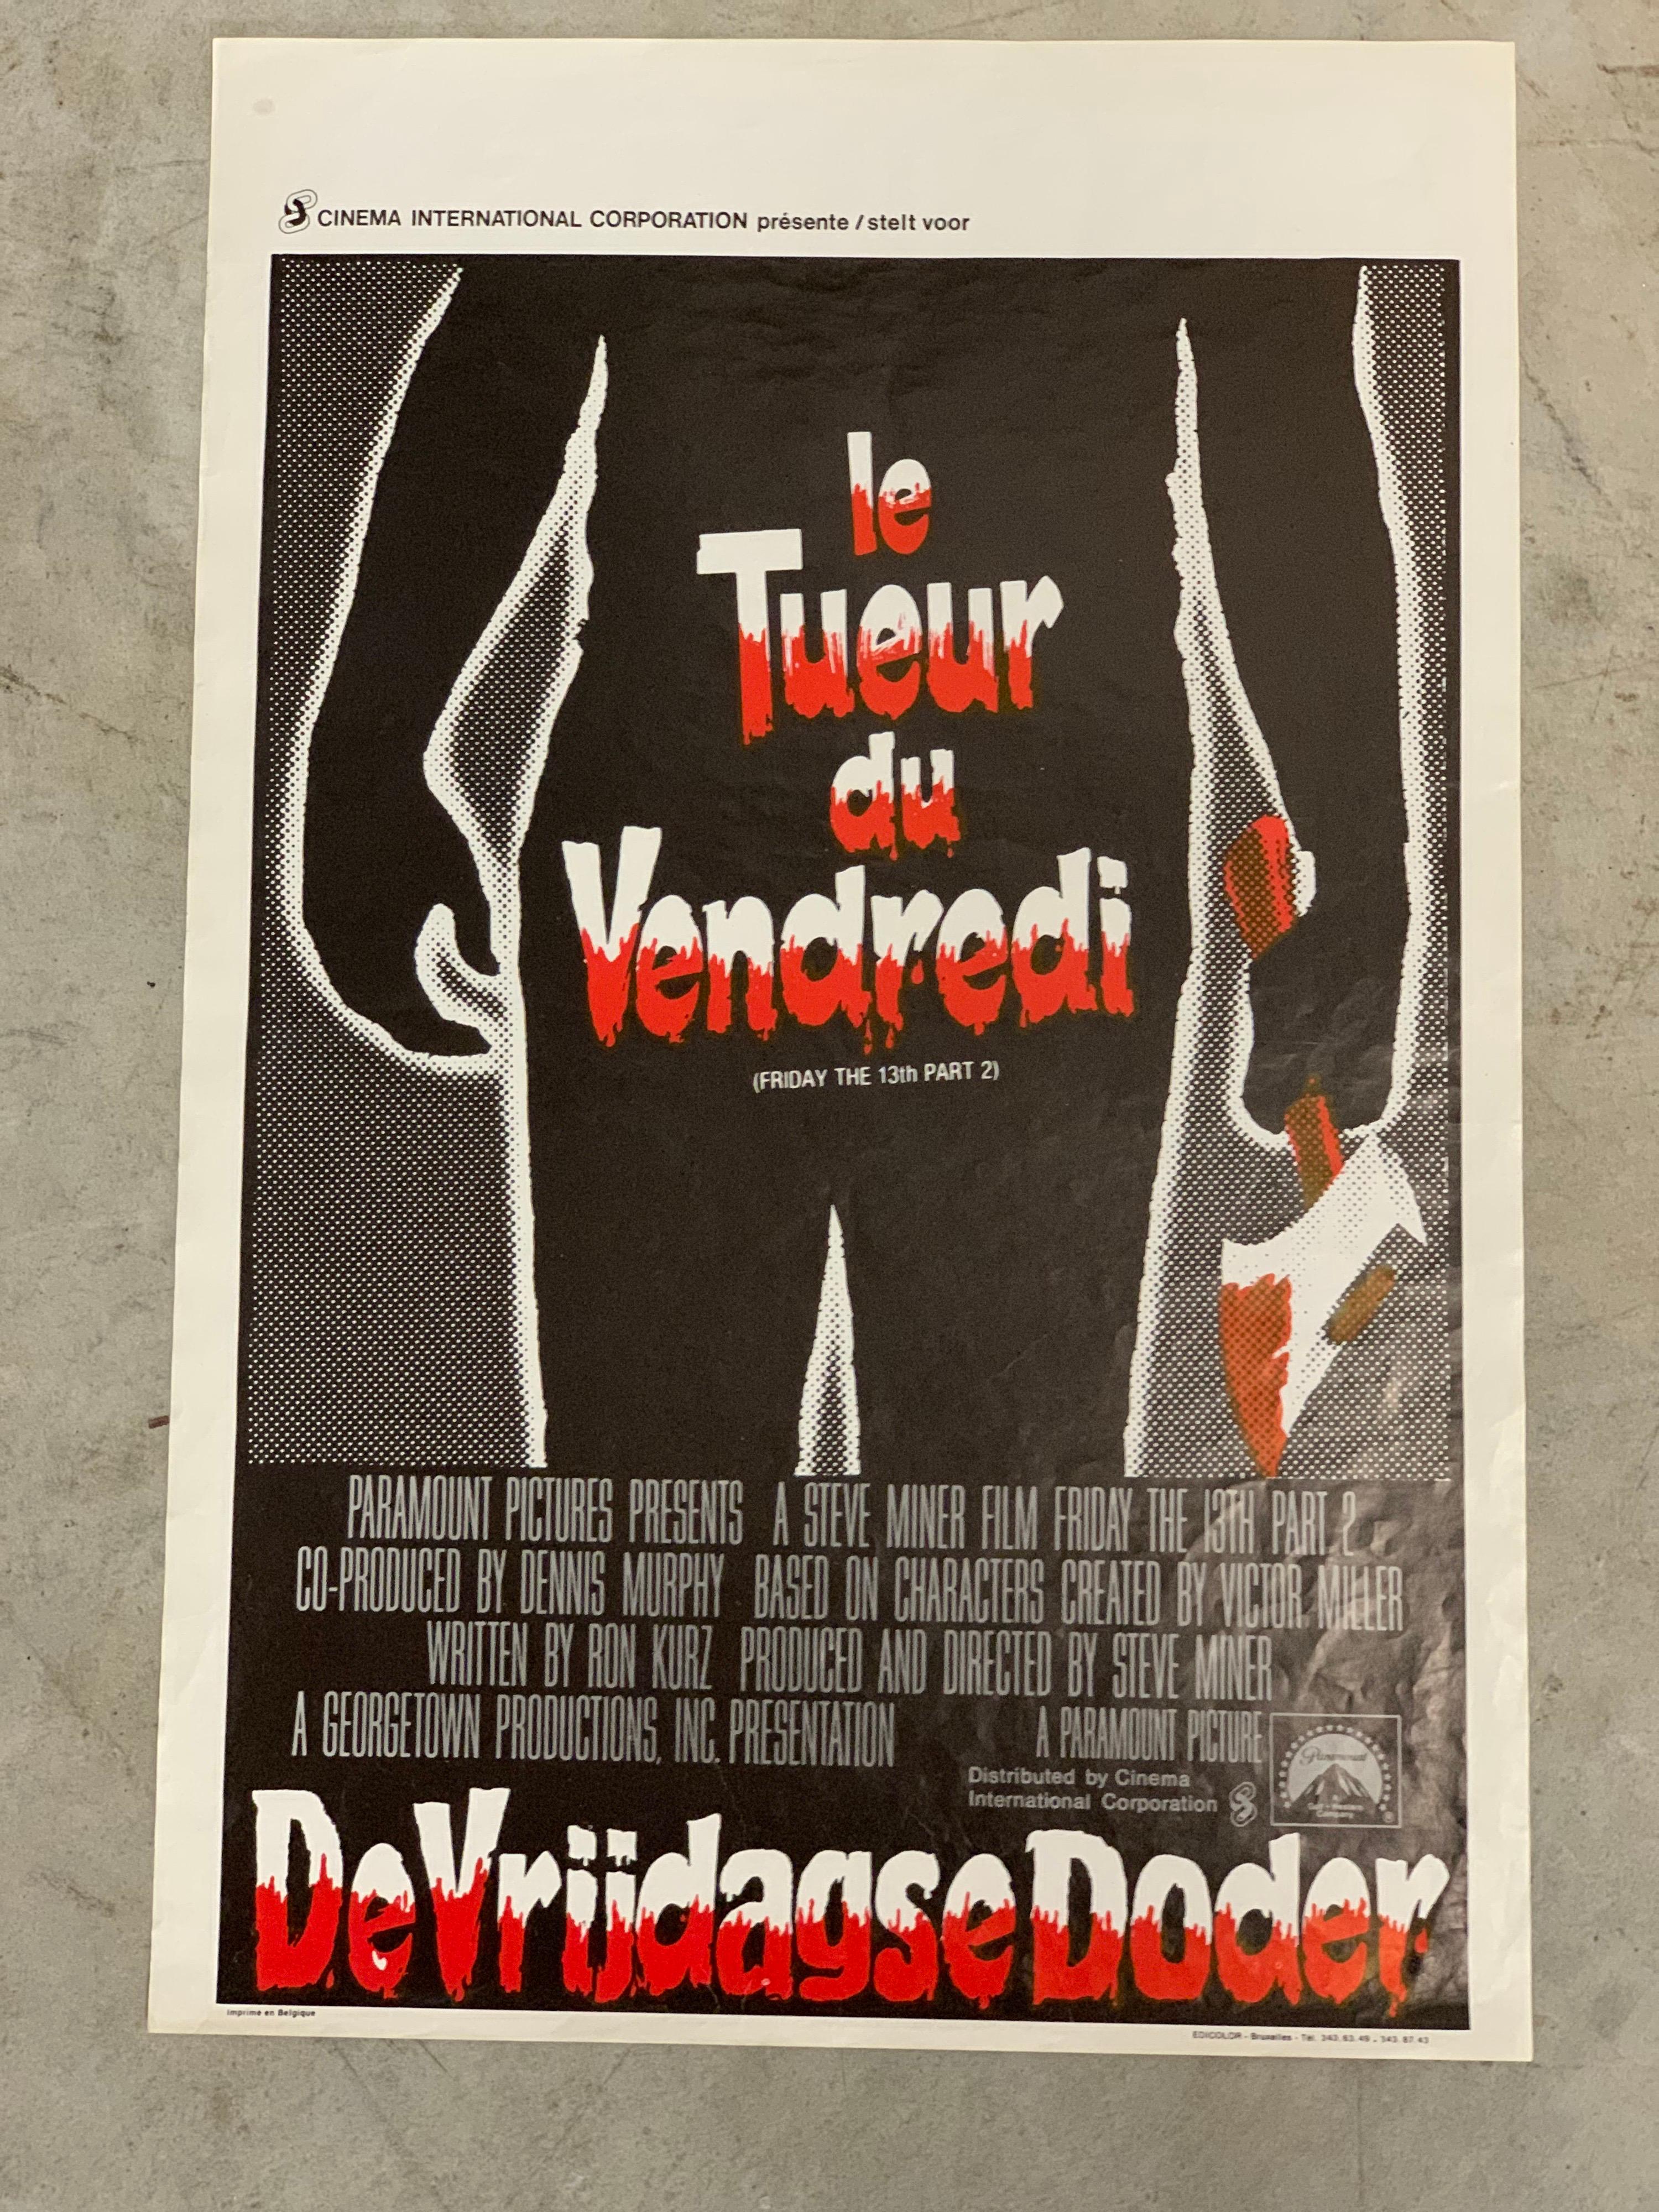 Rare original Belgian movie poster from the 1981 horrorfilm Friday The 13TH part 2. The first starring Jason Voorhees as the killer. Very nice condition overall. For details see the pictures. These posters used to hang in movie theatres a a preview